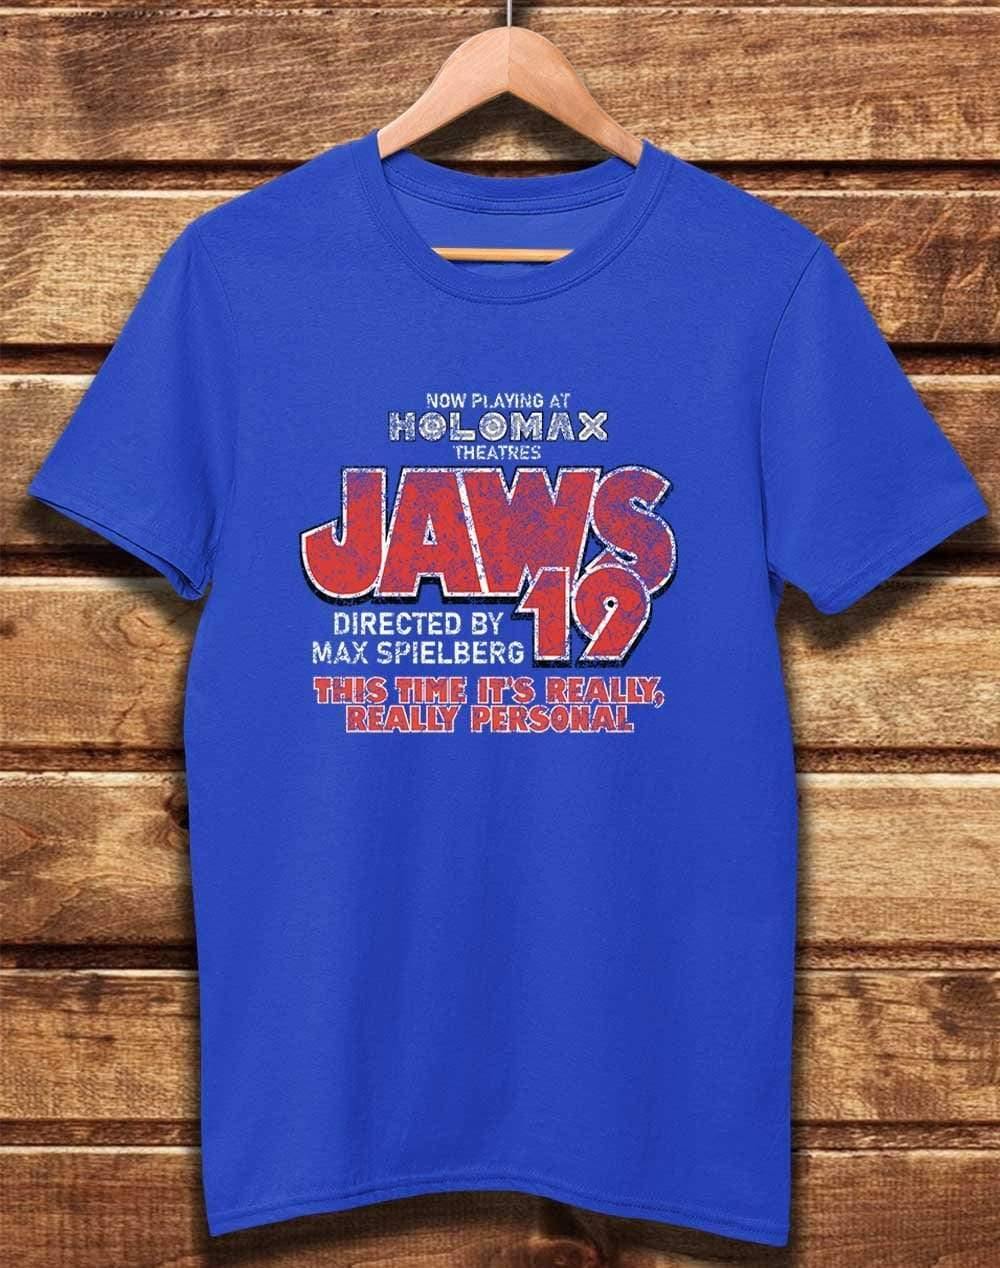 DELUXE Jaws 19 Organic Cotton T-Shirt XS / Bright Blue  - Off World Tees